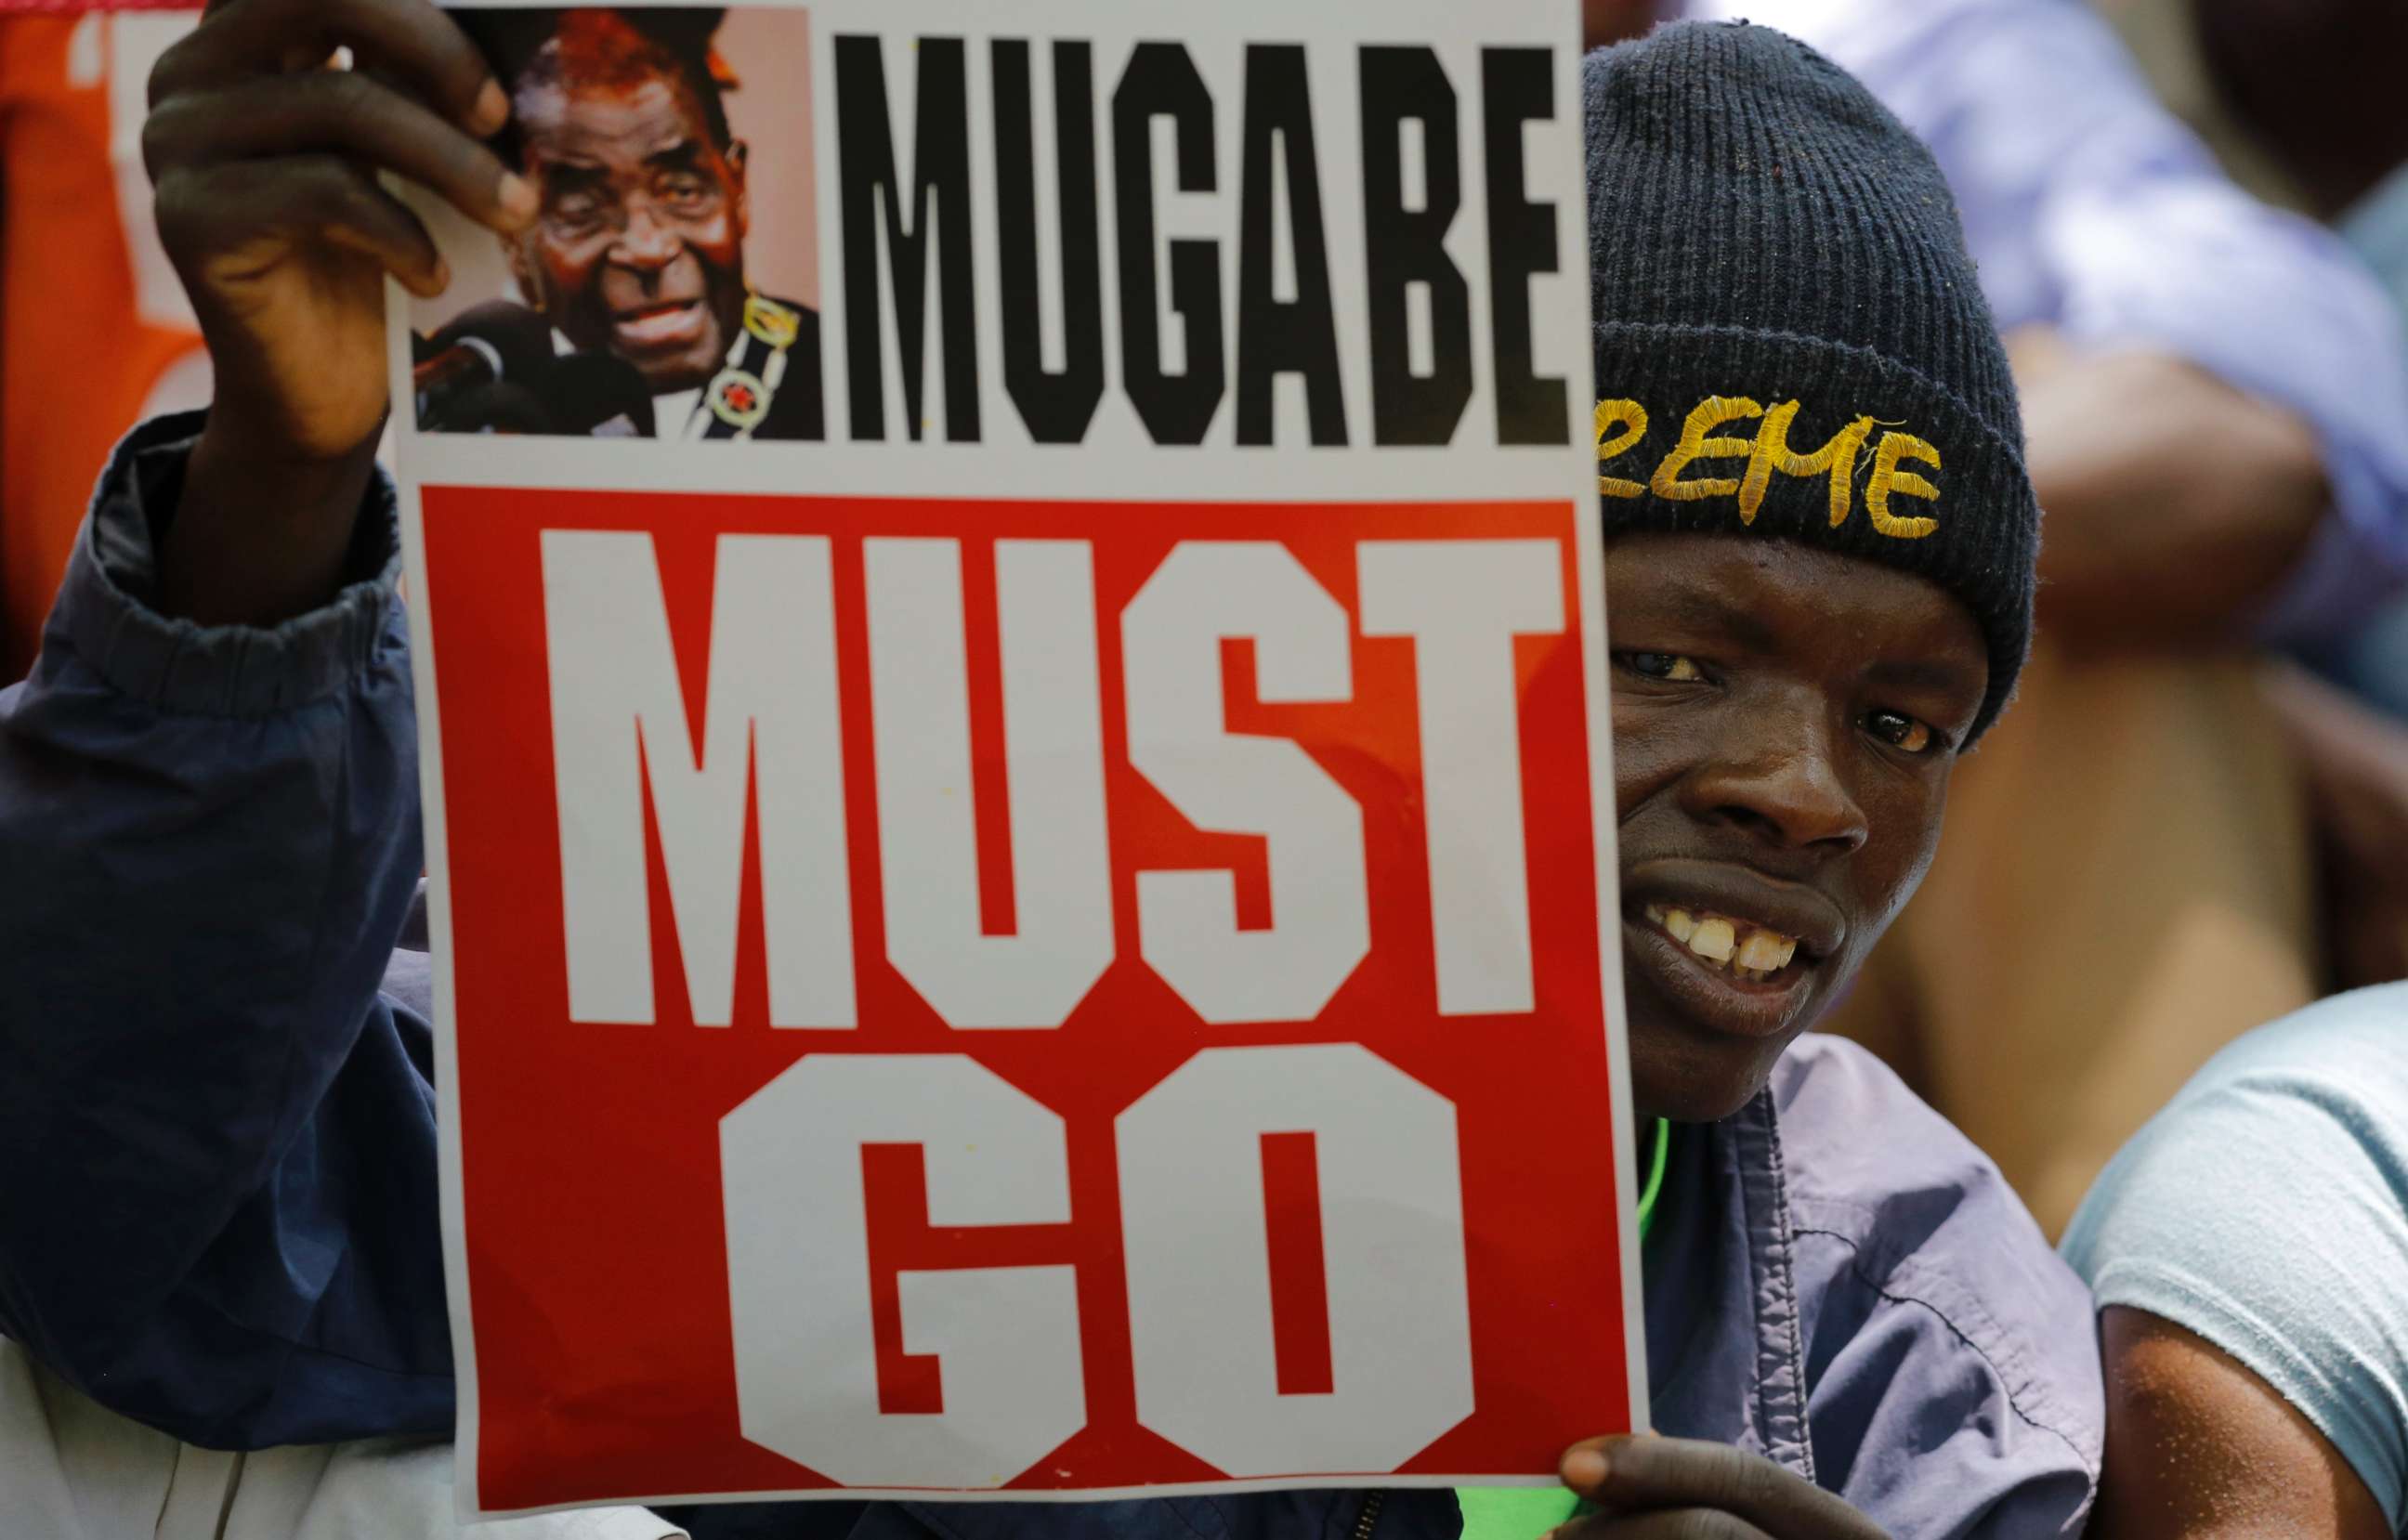 PHOTO: People gather at an opposition party rally outside the state parliament in before the proposed impeachment of president Robert Mugabe, Harare, Zimbabwe, Nov. 21, 2017.